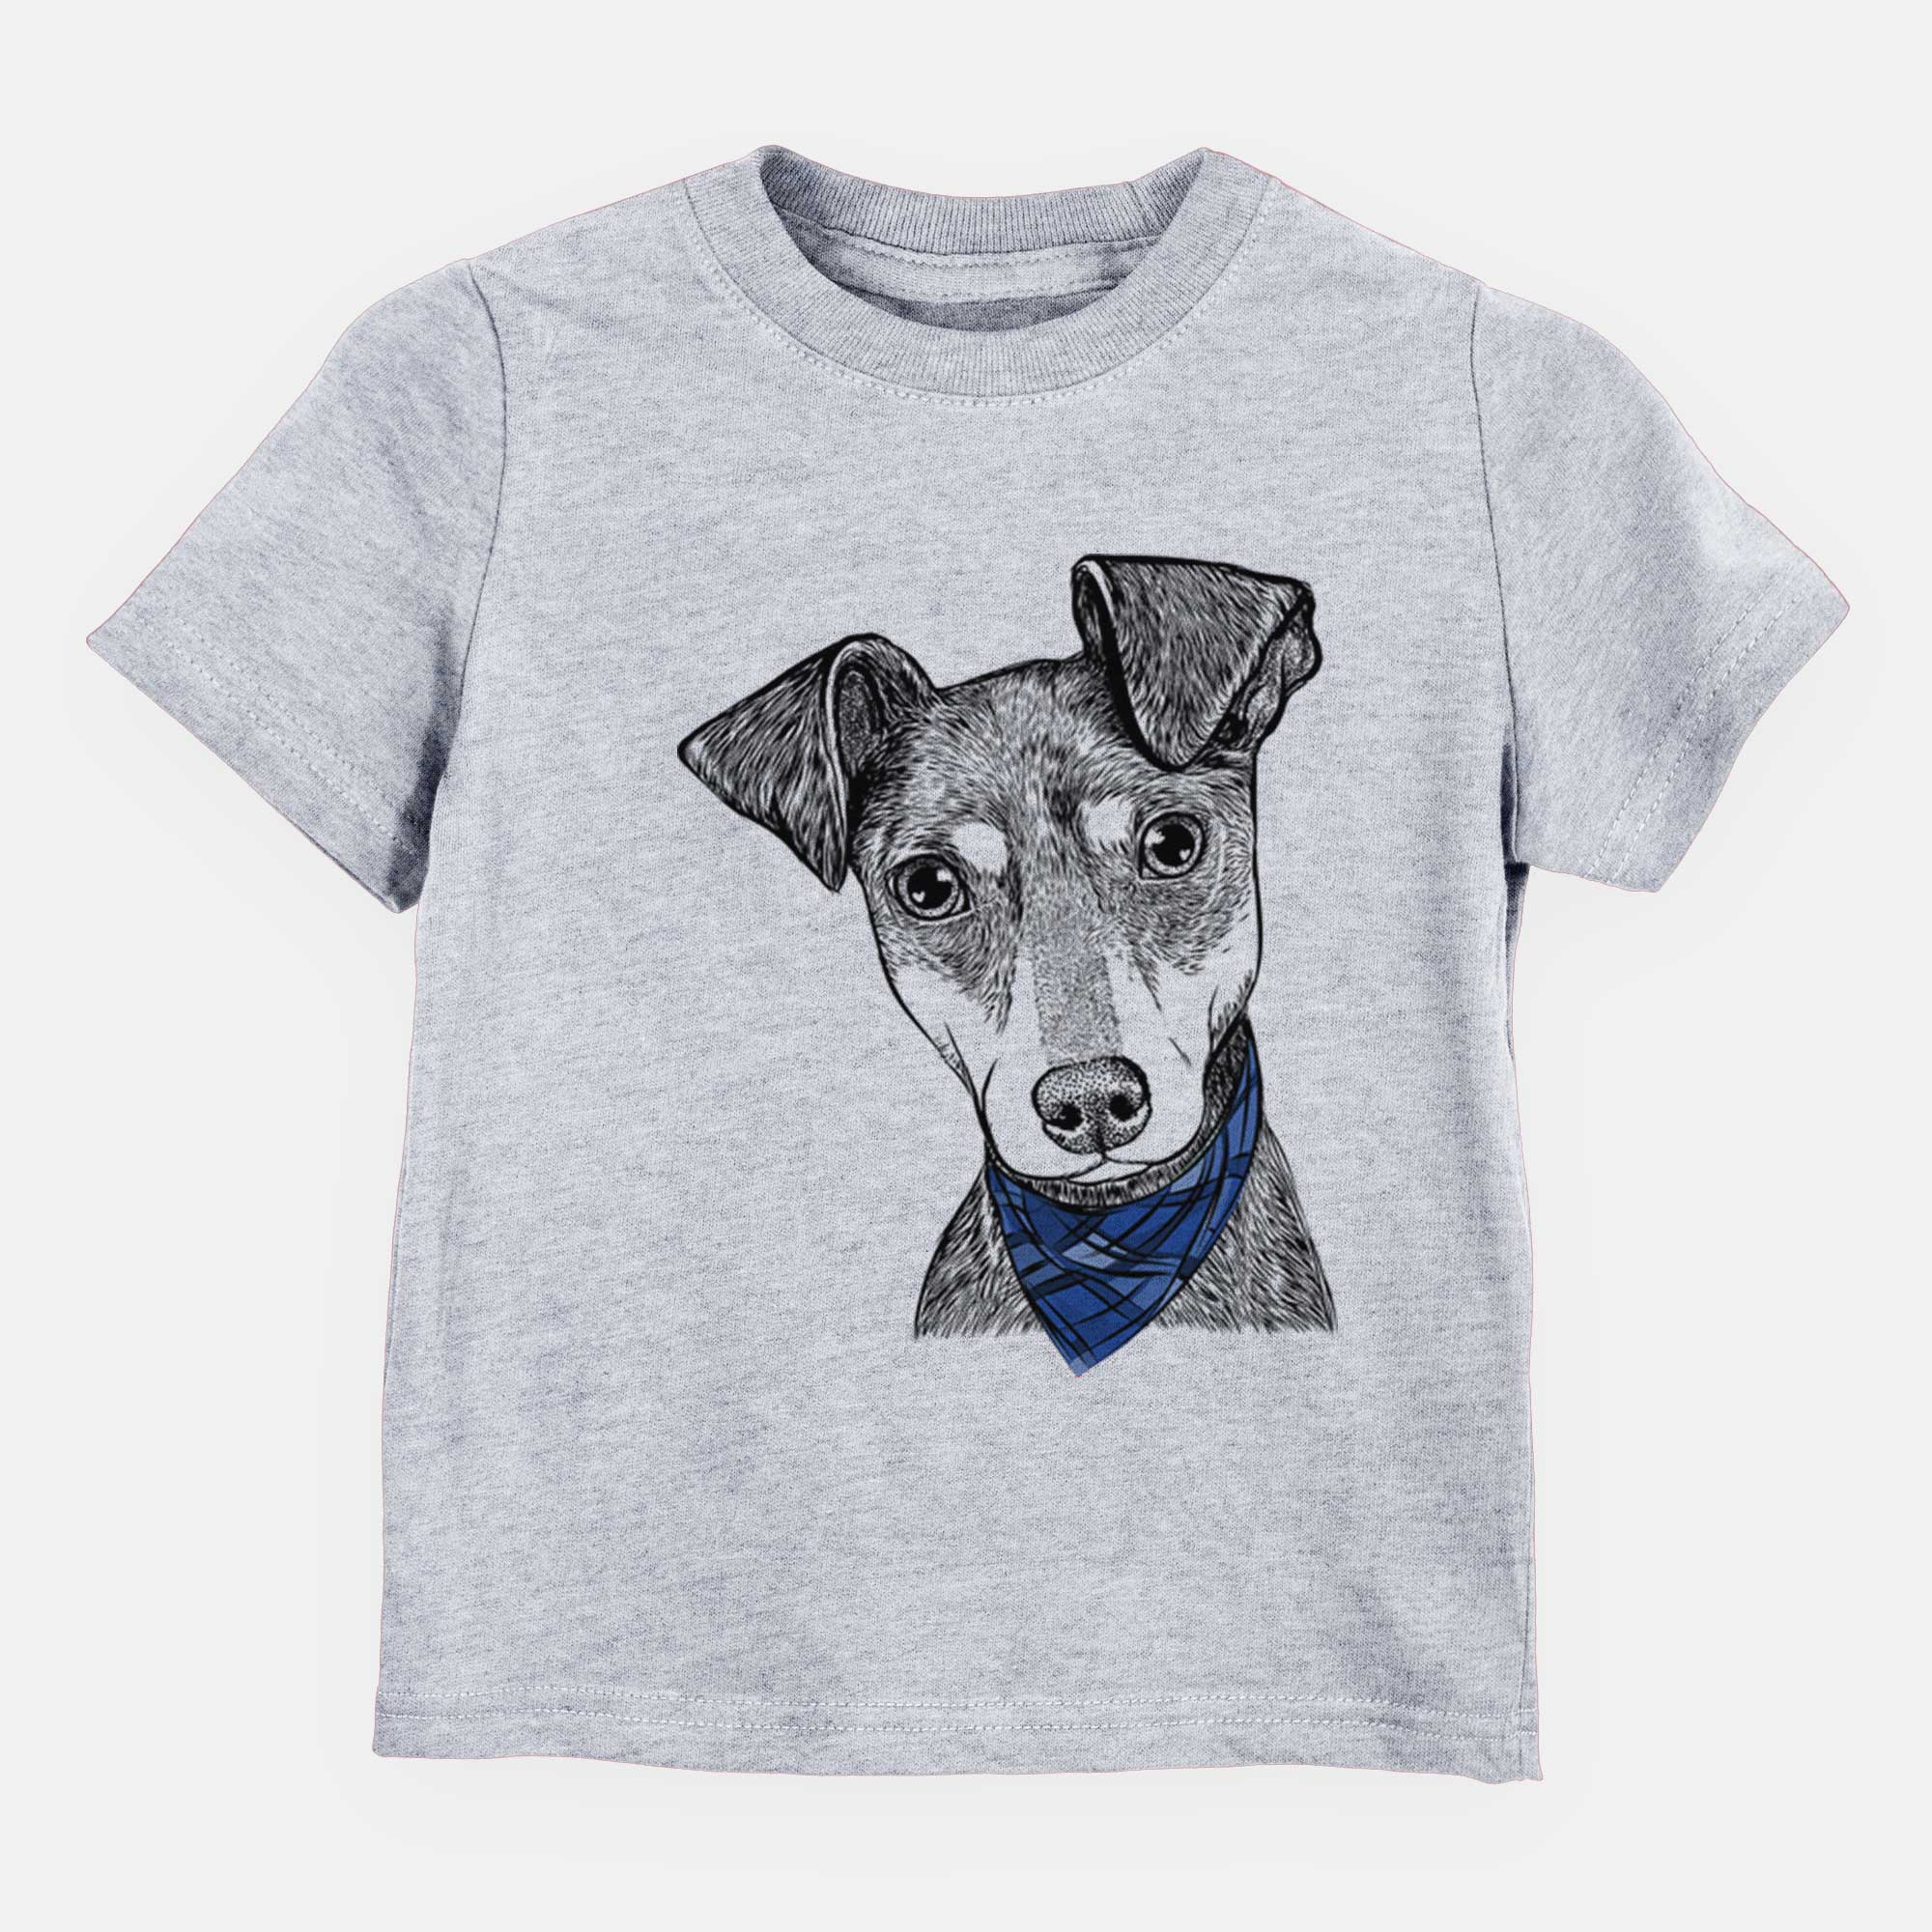 Bandana Manny the Manchester Terrier - Kids/Youth/Toddler Shirt